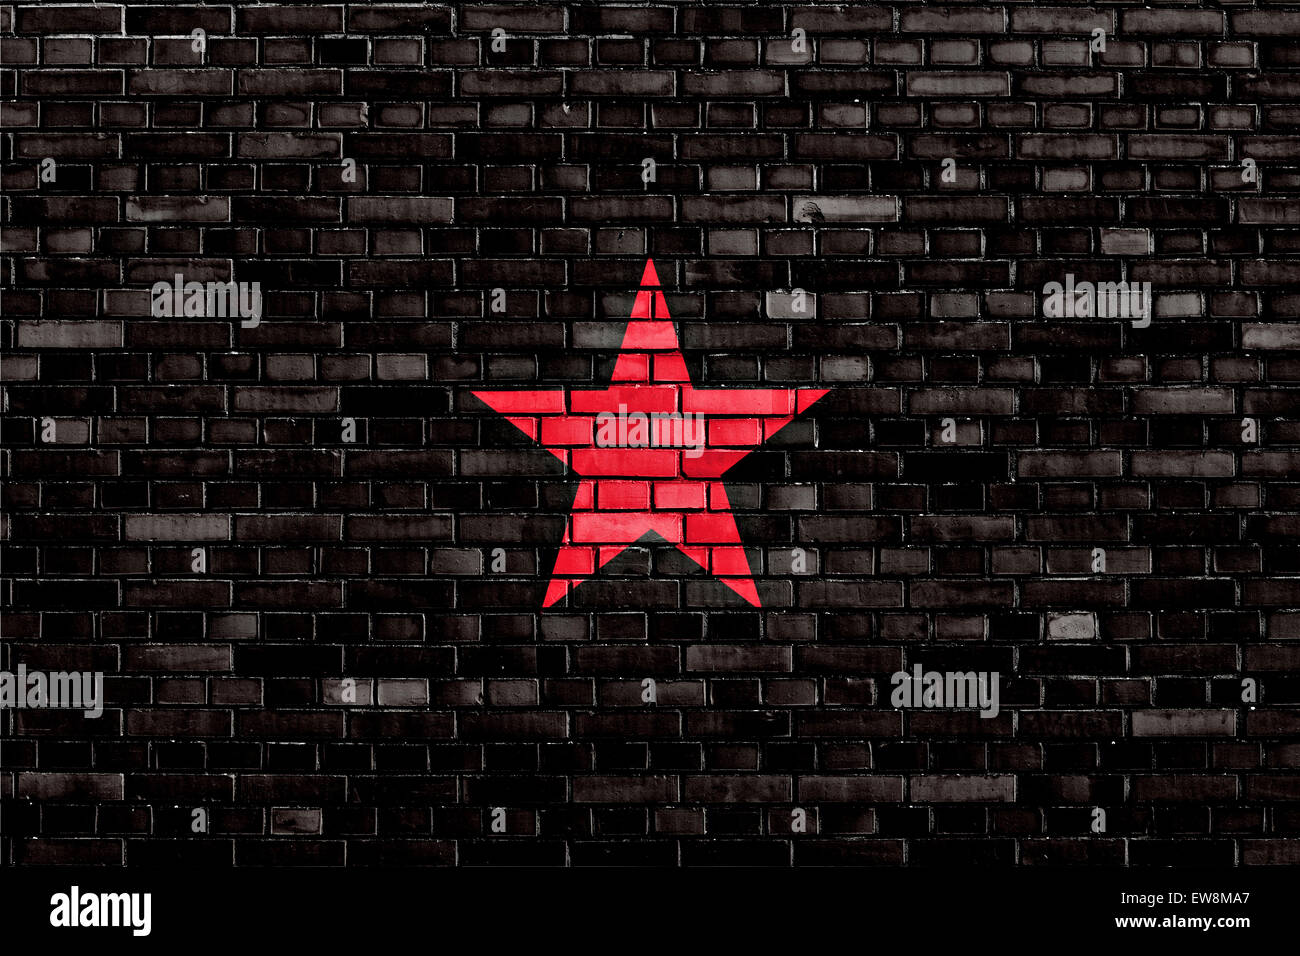 flag of EZLN painted on brick wall Stock Photo